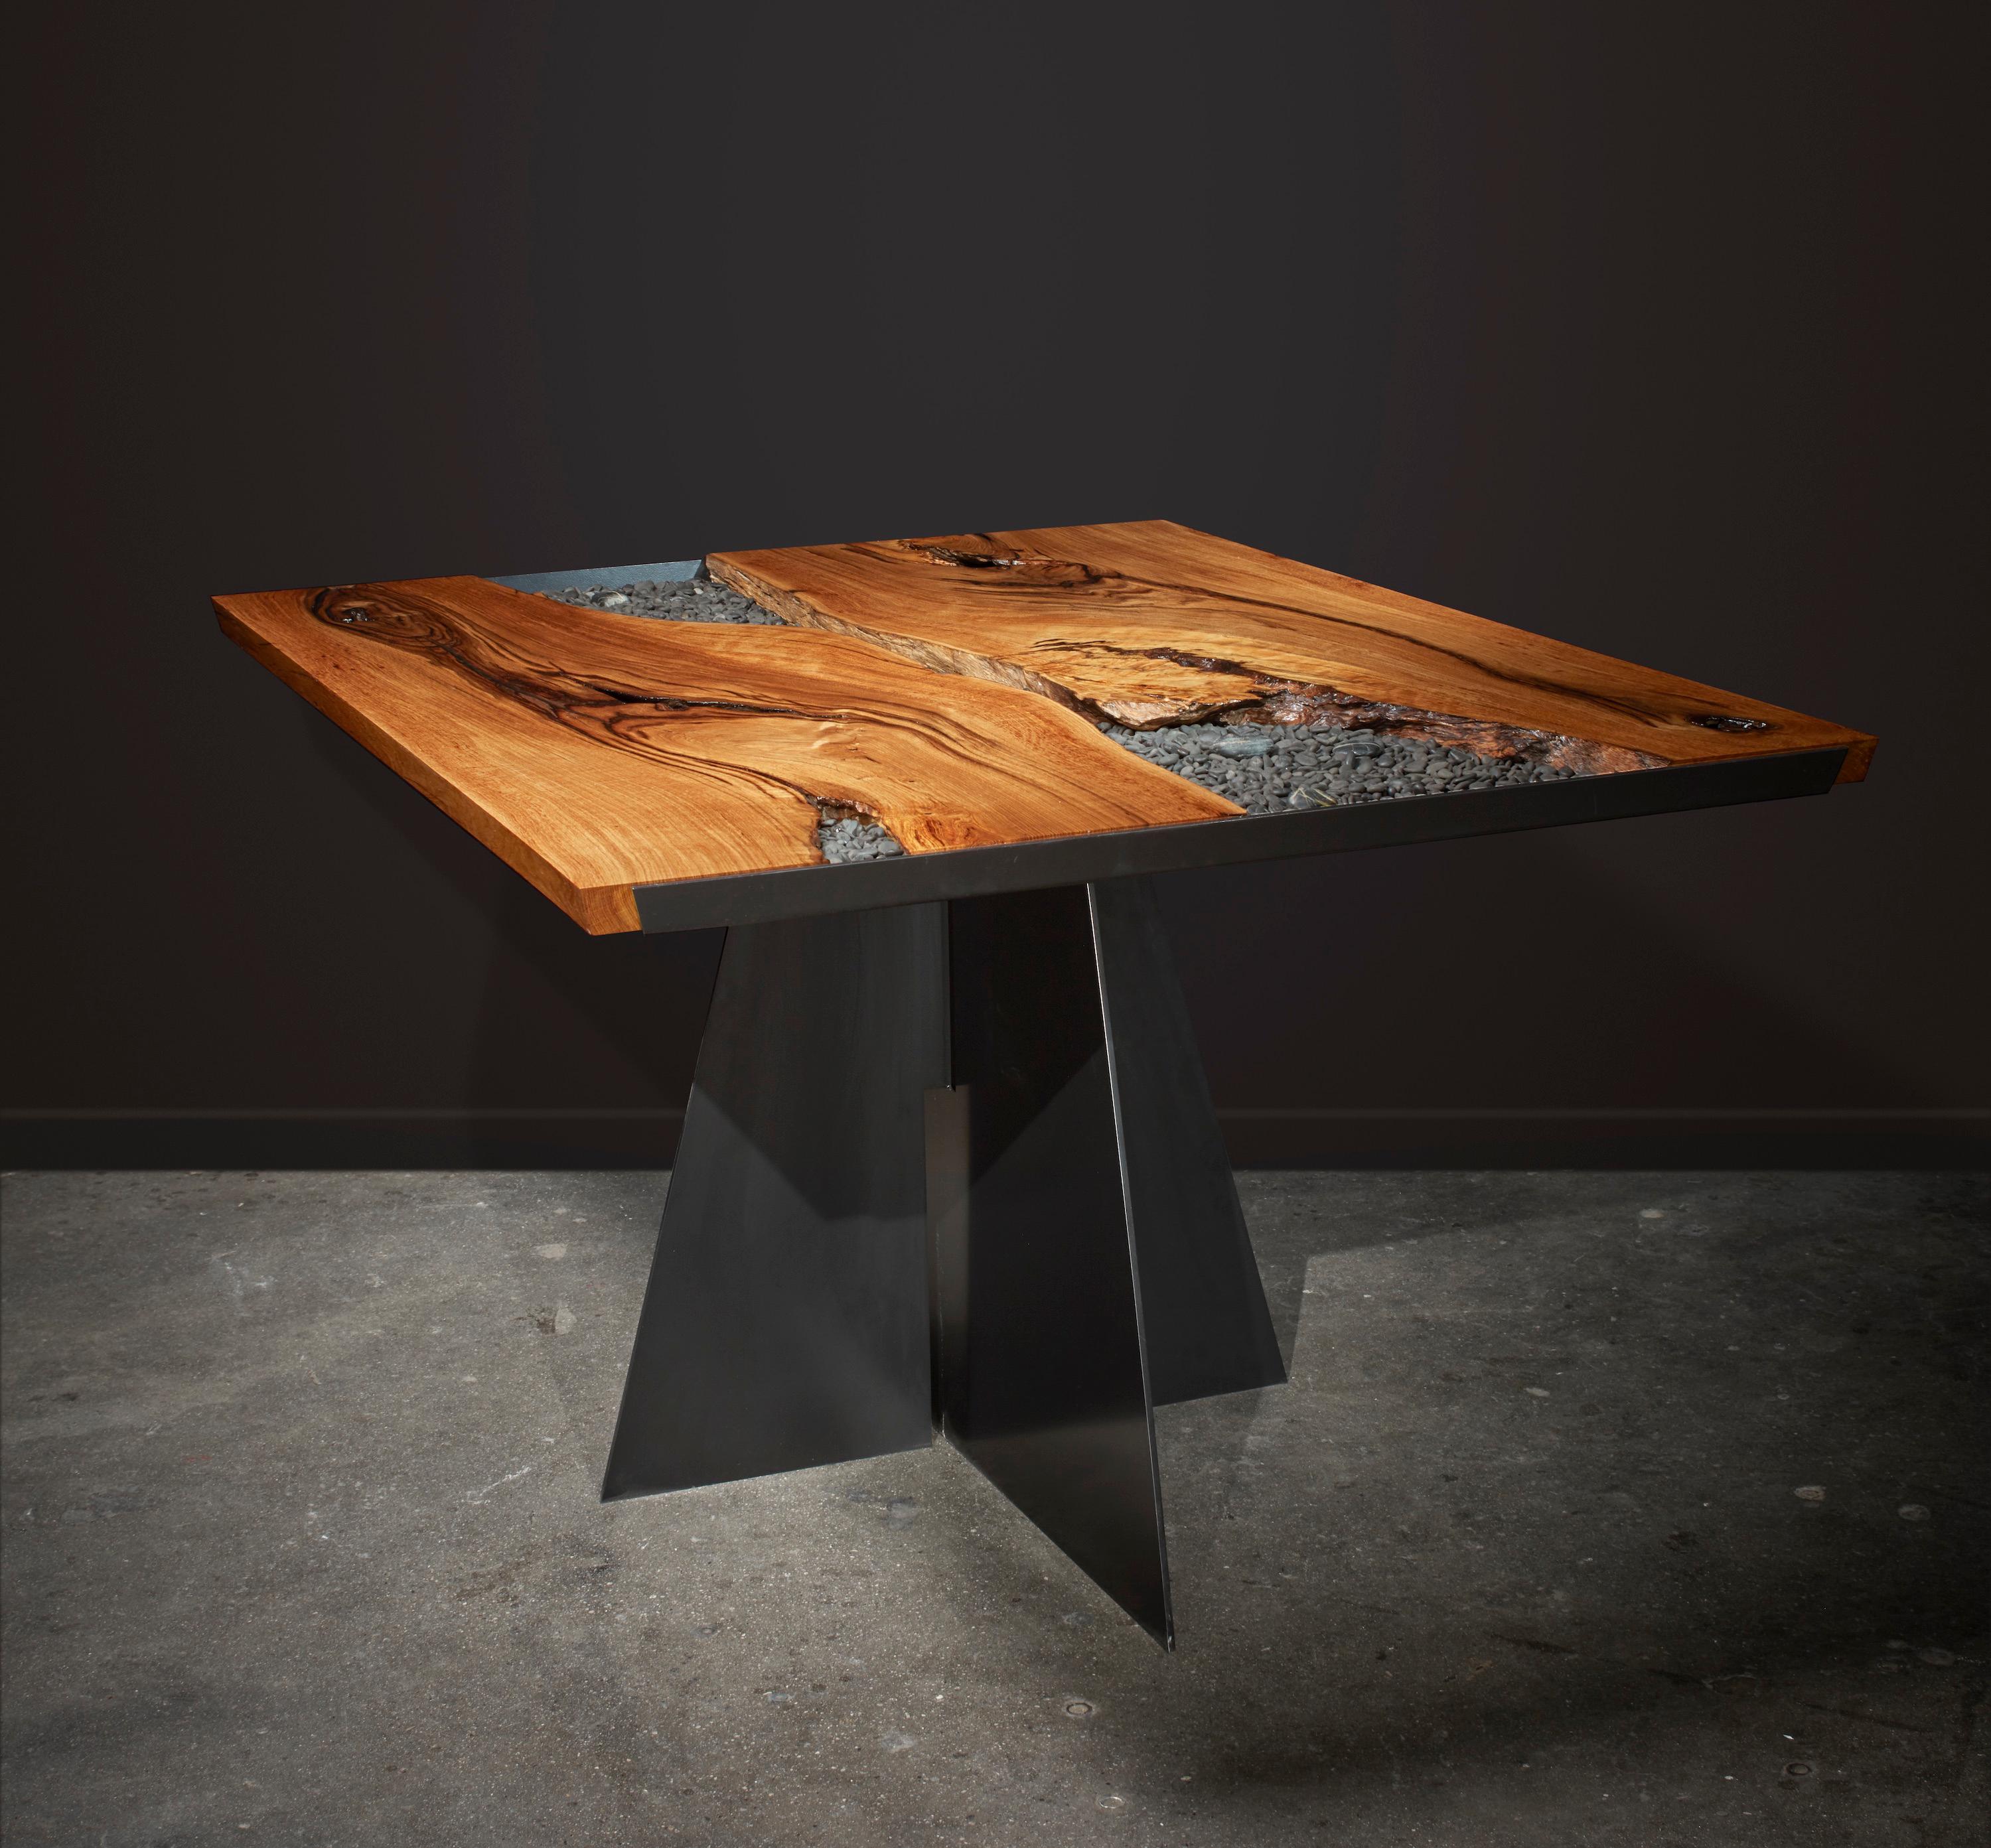 Wisdom dining table is conceived, designed and created by award-winning artist and architectural designer Michael Olshefski of Primal Modern. Inspired by nature and bonsai, this serene yet sensuous First Place award-winning design can be purchased